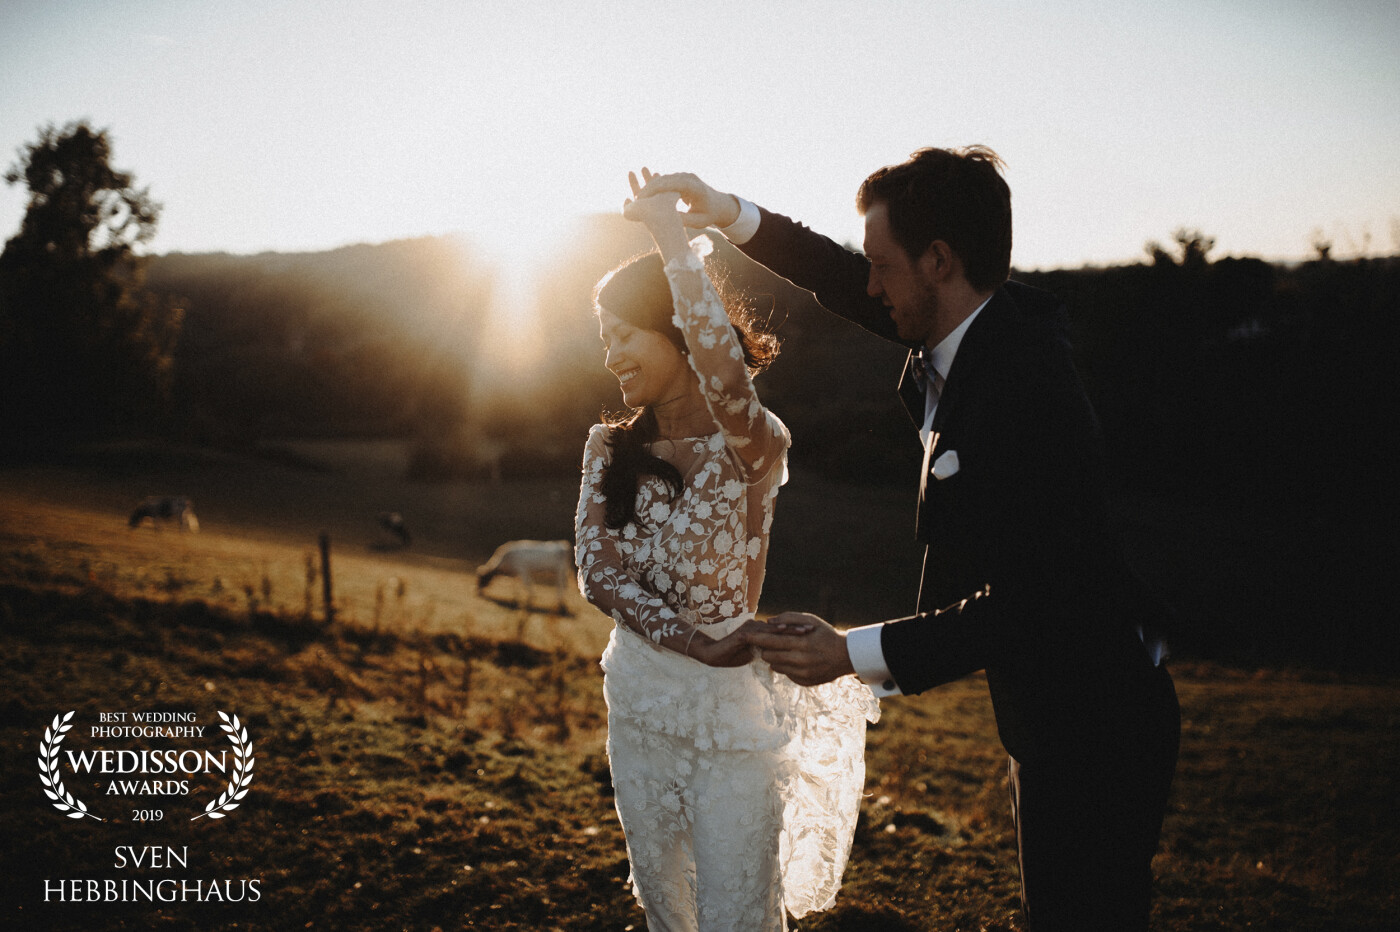 This moment was just beautiful. Johannes and Elisa danced their wedding dance in the sunset. The time seemed to stand still and Elisa closed her eyes to enjoy this big moment.